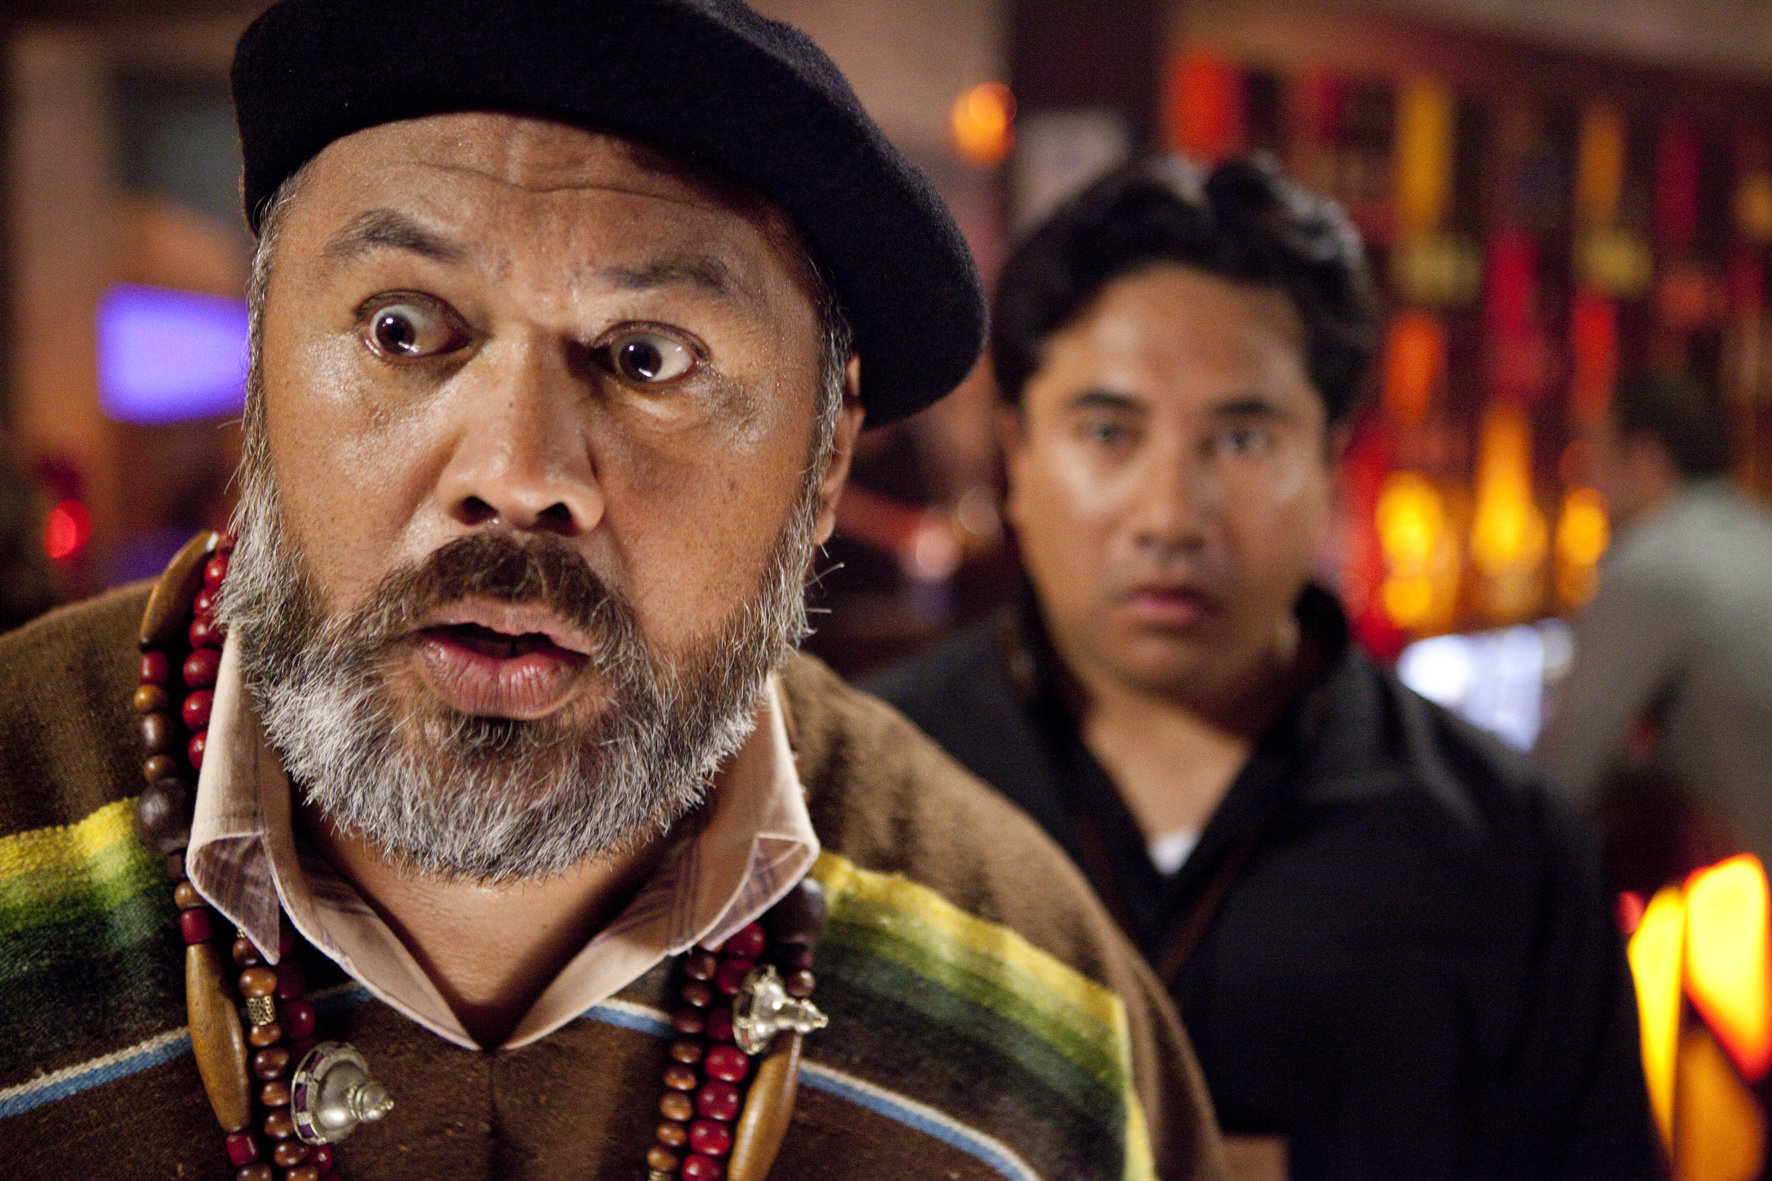 Shimpal Lelisi and Iaheto Ah Hi in Sione's 2: Unfinished Business (2012)